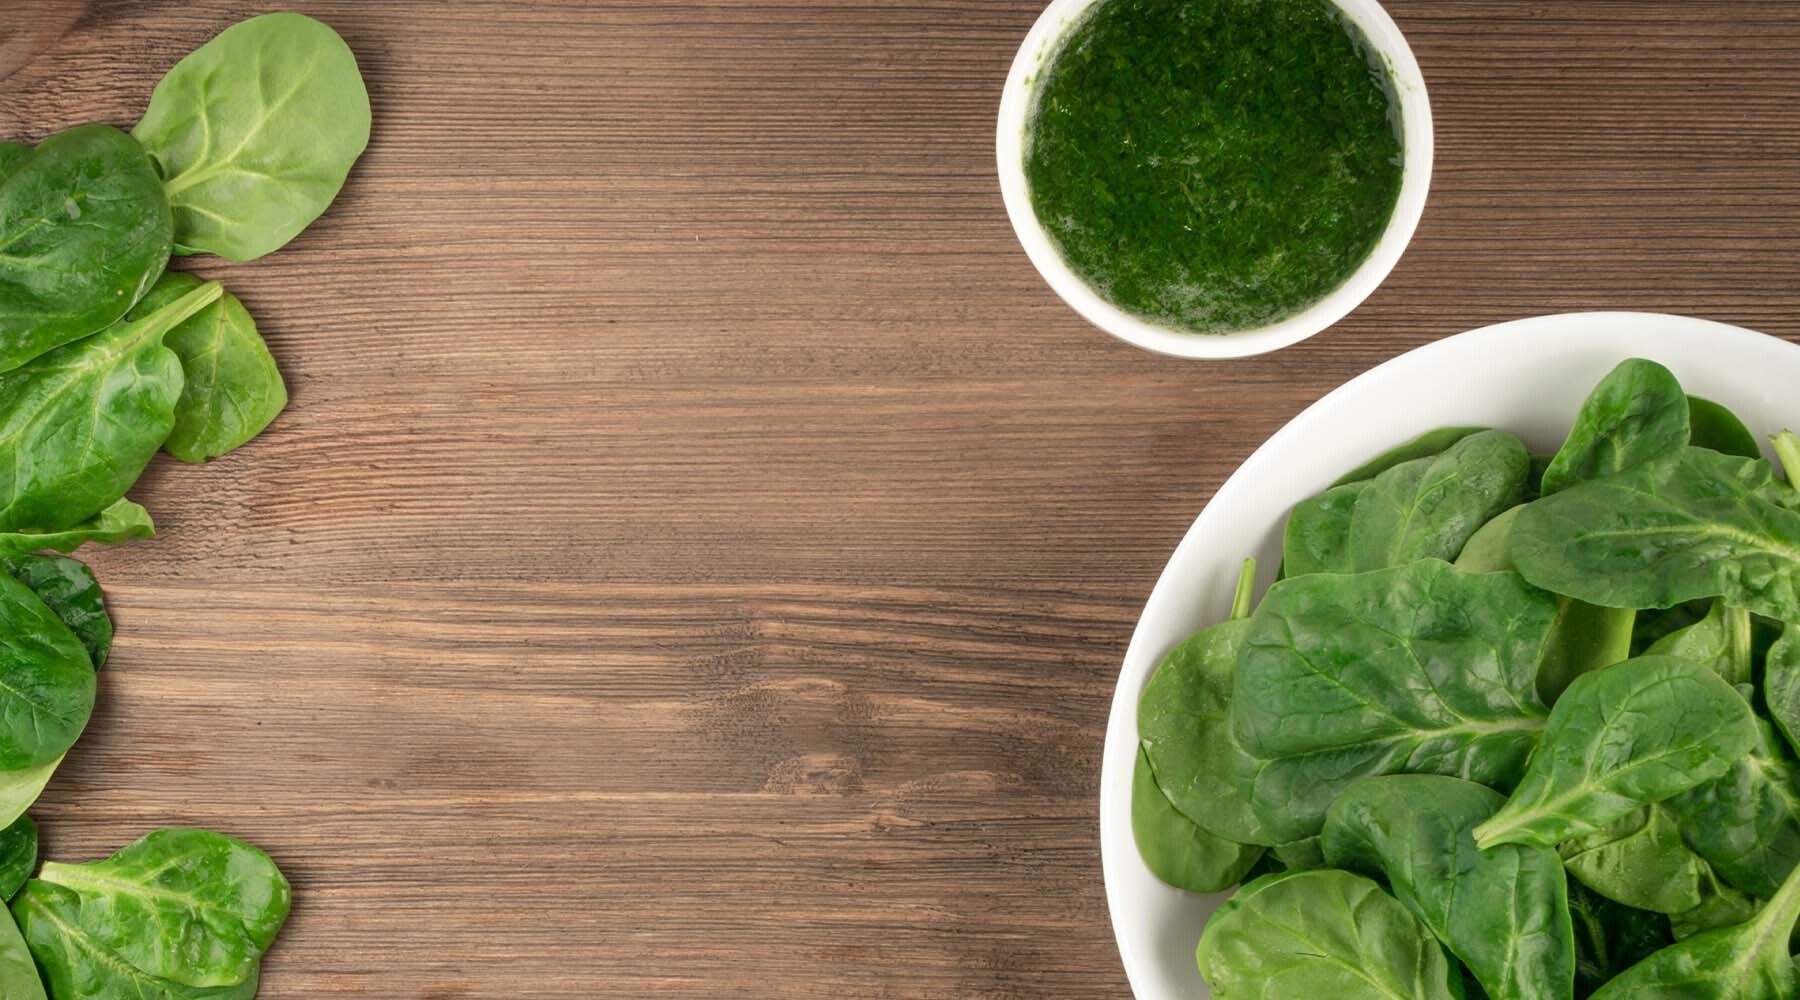 How does the protein content of spirulina compare to that of spinach?